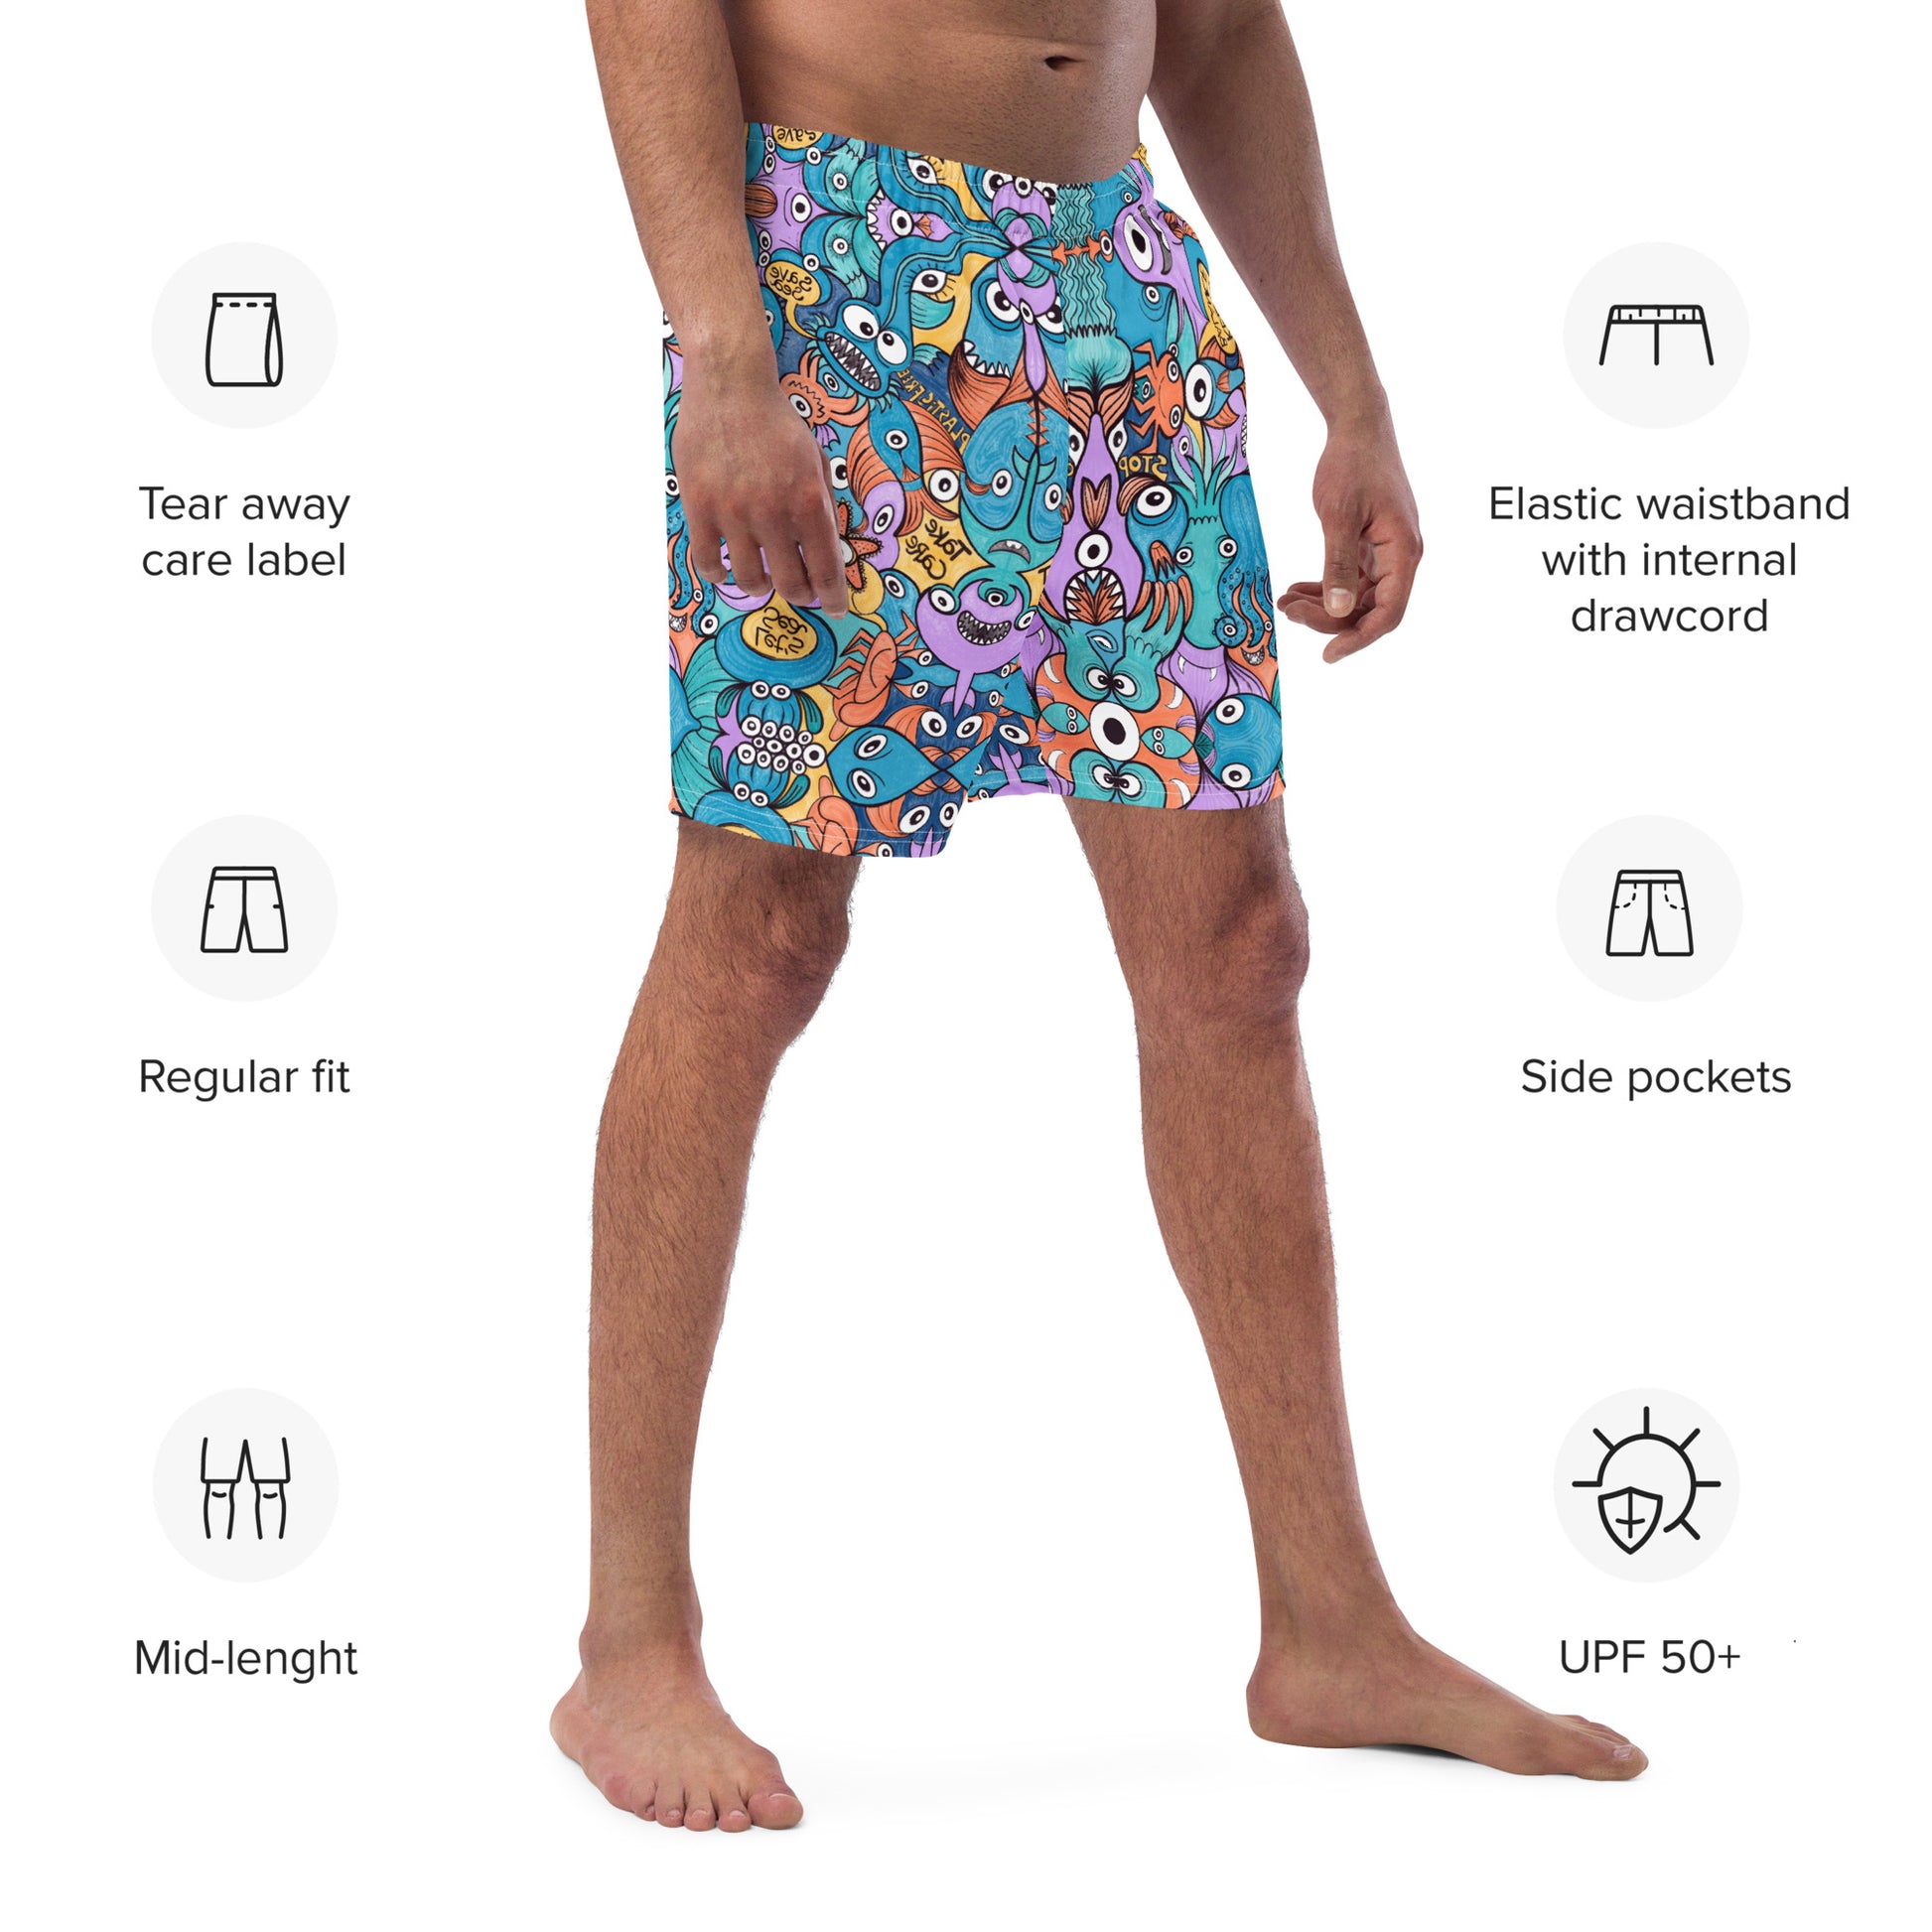 Wake up, time to take care of our sea Men's swim trunks. Specifications